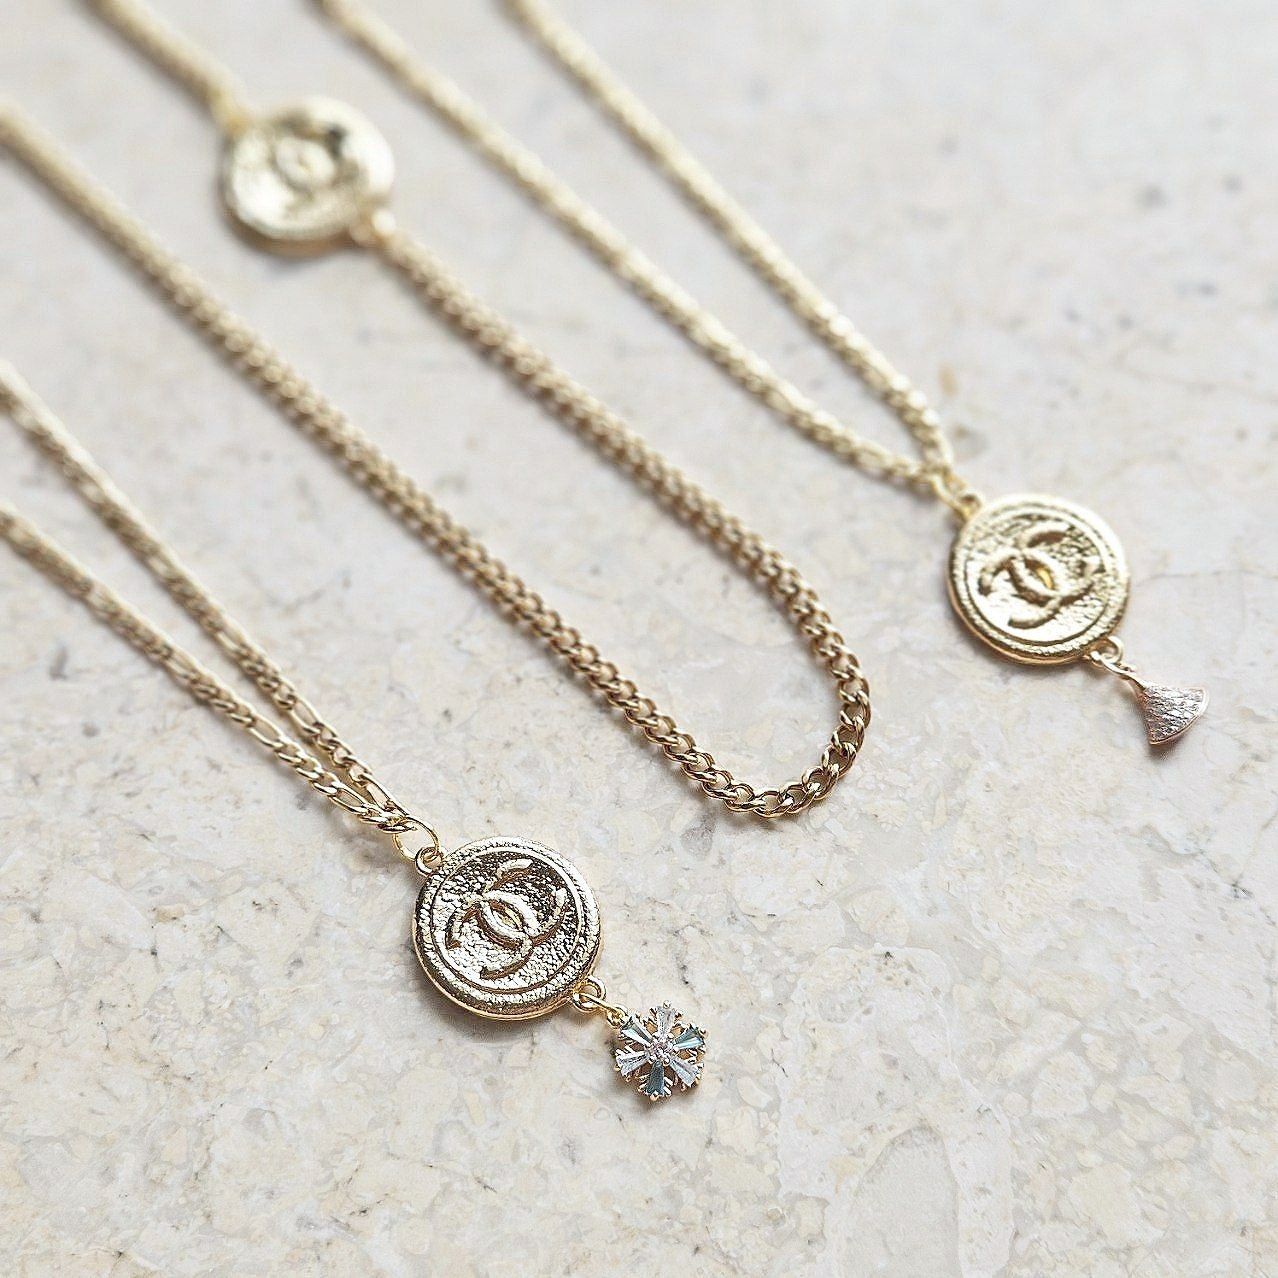 Chanel Vintage Gold Necklace with Snowflake Charm